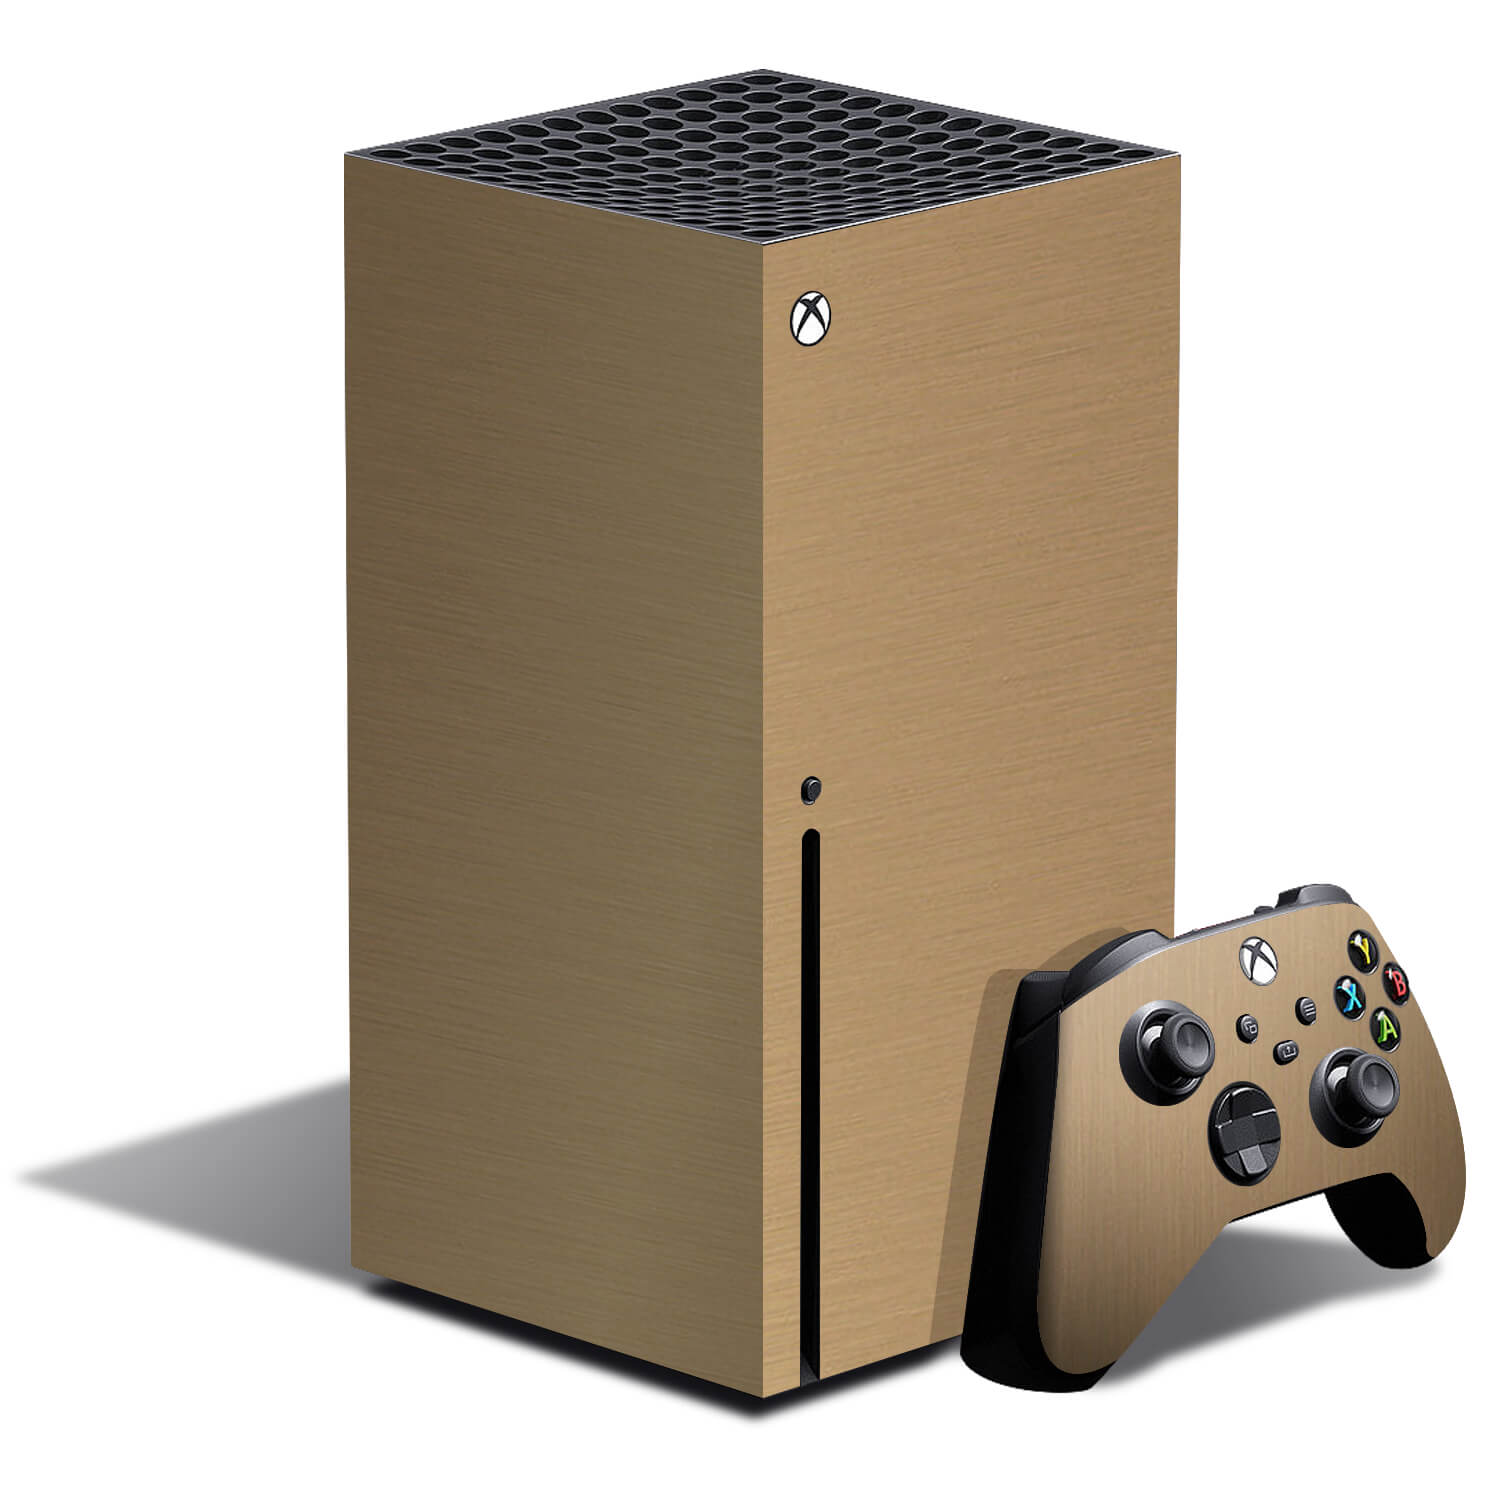 is the xbox one series x